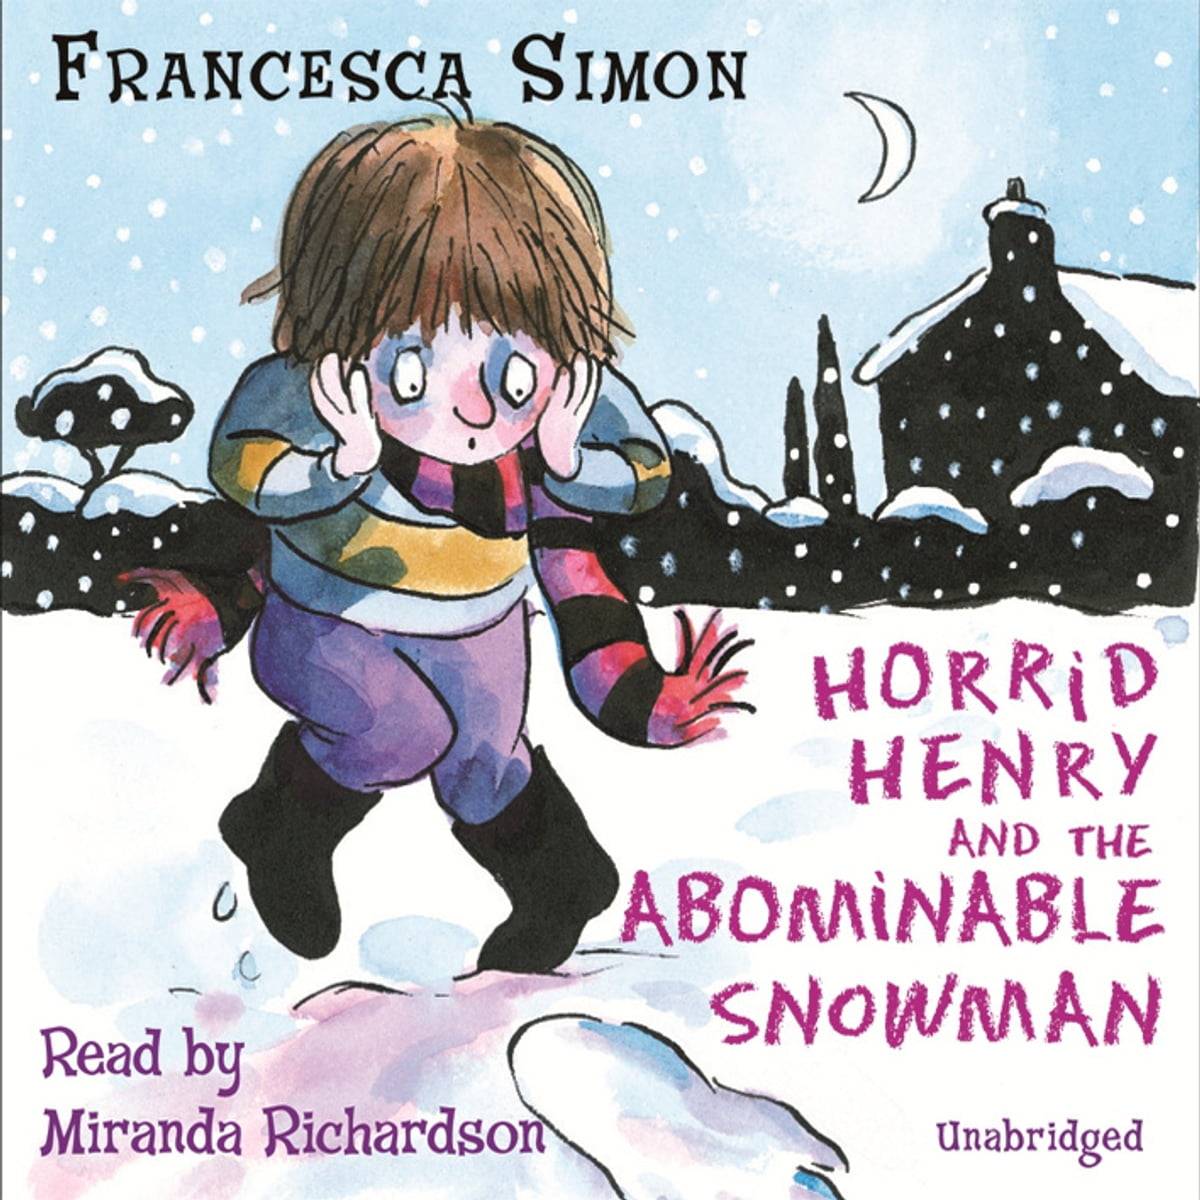 IMG : Horrid Henry and the Abominable Snowman